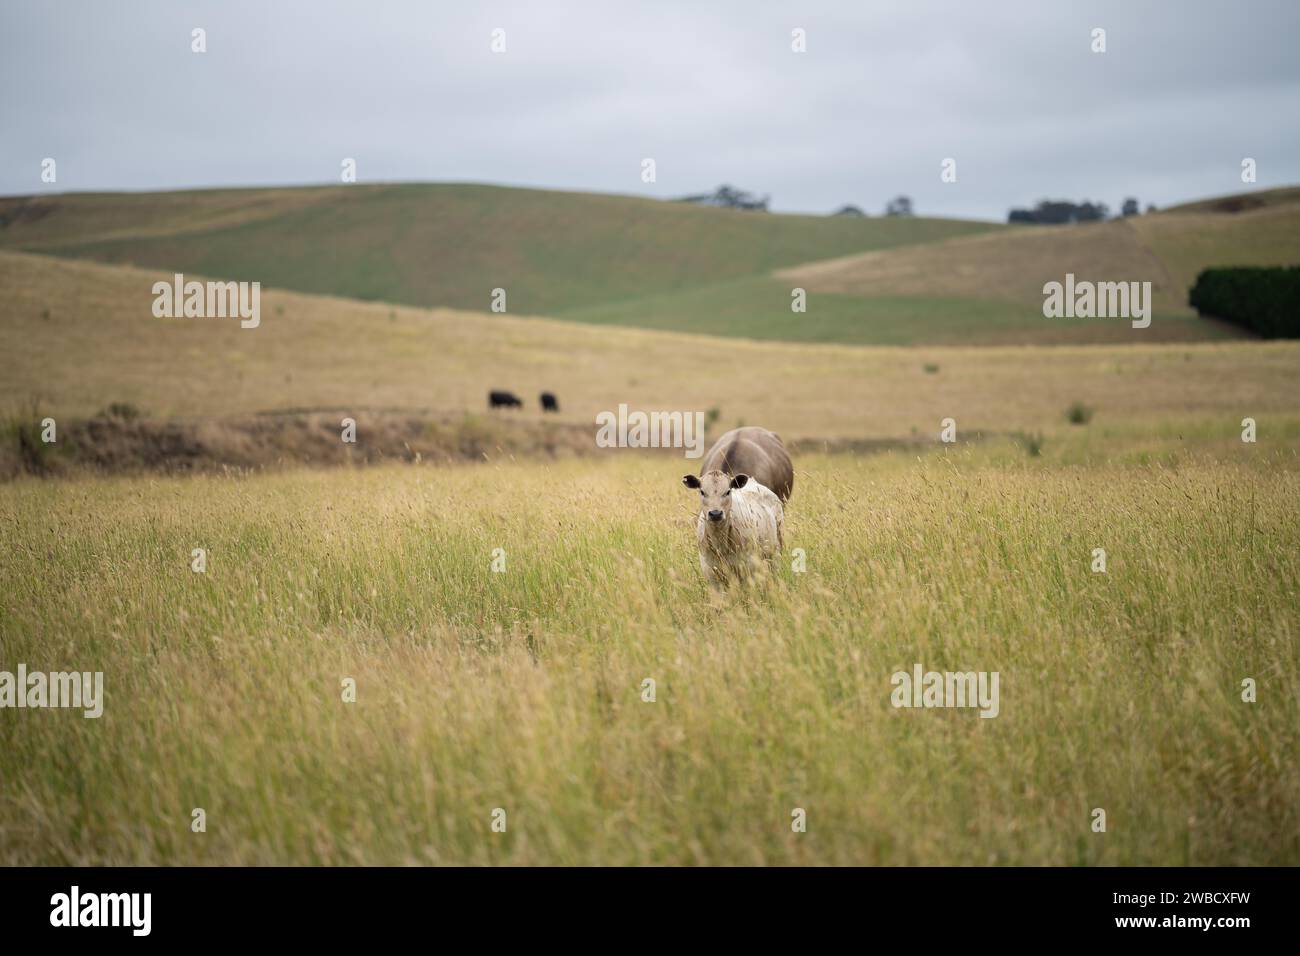 Cows in a field, Stud Beef bulls, cow and cattle grazing on grass in a field, in Australia. breeds include speckle park, murray grey, angus, brangus a Stock Photo